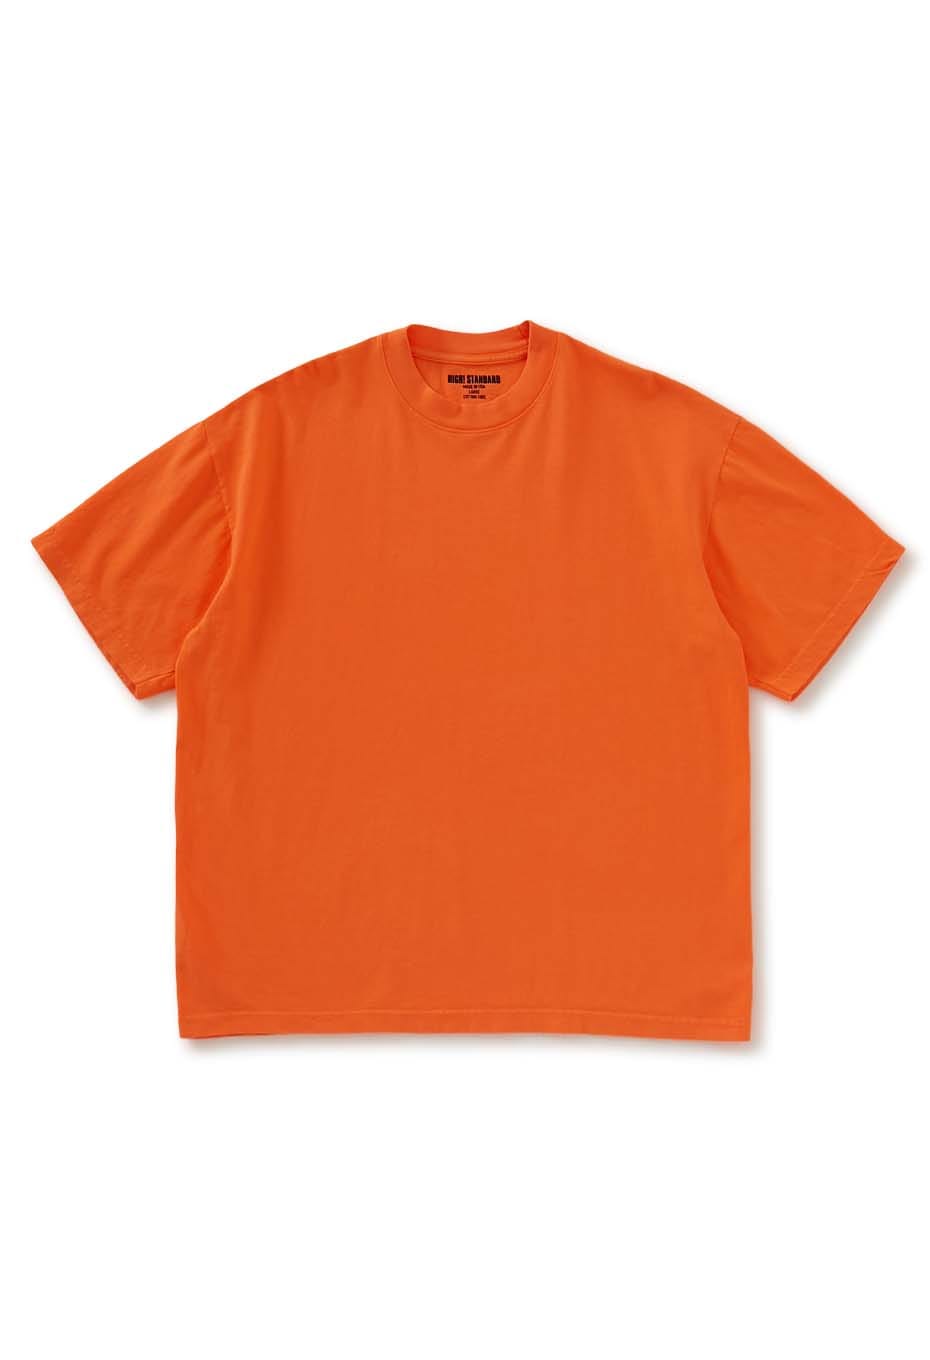 HIGH STANDARD SECURITY NEON ショートスリーブ Tシャツ MADE IN USA